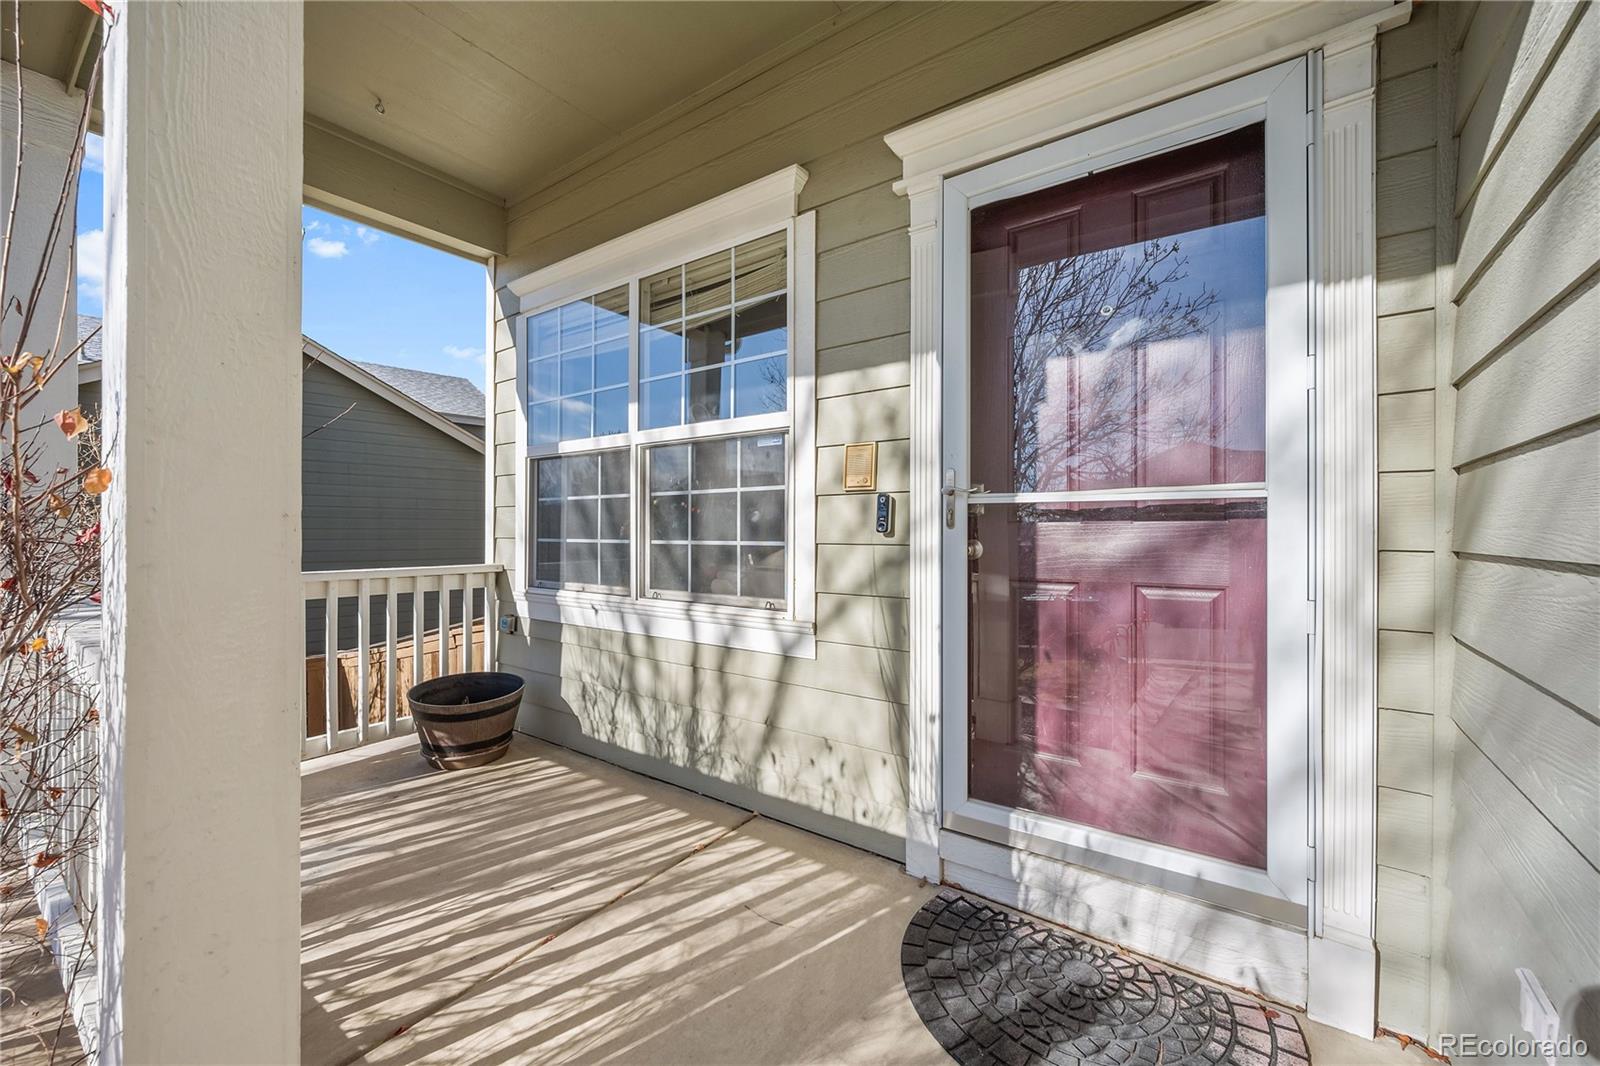 1201  riddlewood road, Highlands Ranch sold home. Closed on 2024-02-26 for $662,500.